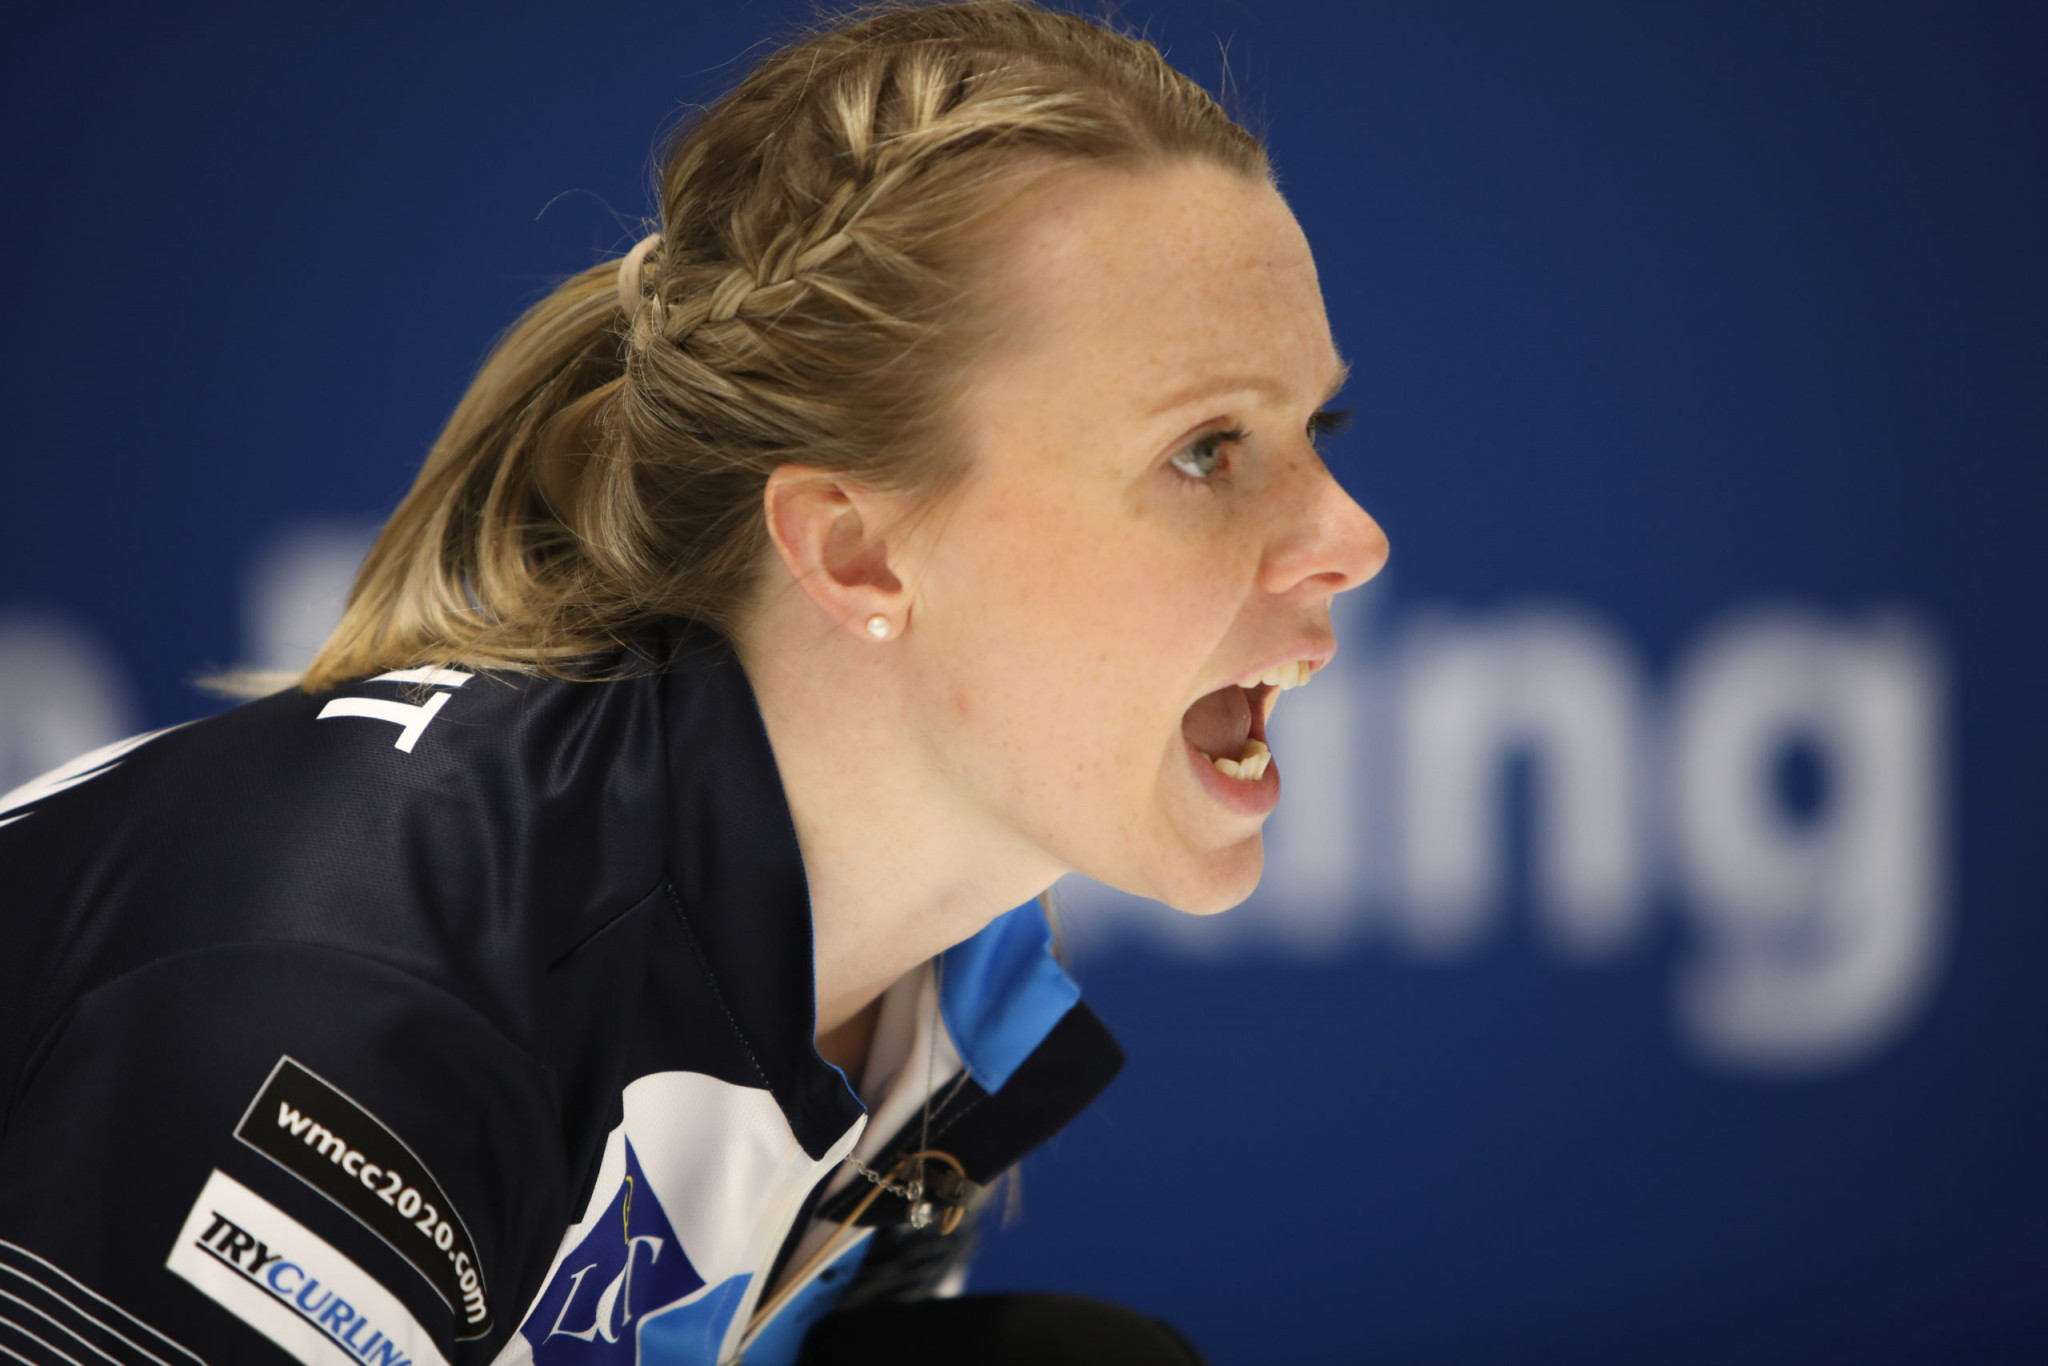 European curling medallist stops playing to treat patients during COVID-19 crisis